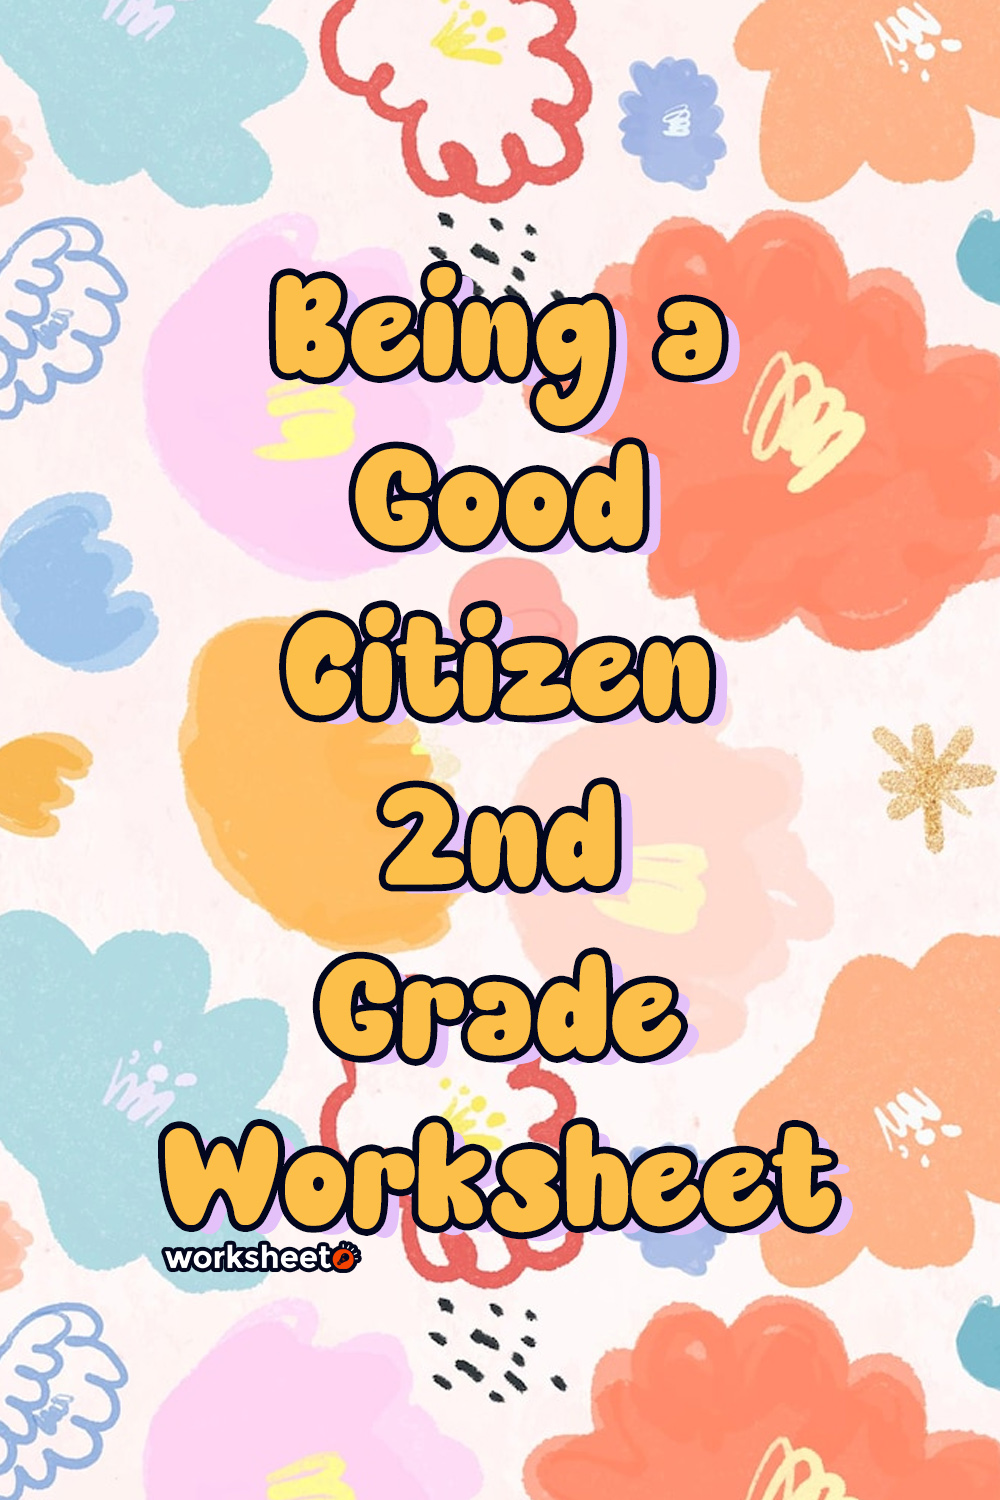 17 Images of Being A Good Citizen 2nd Grade Worksheet